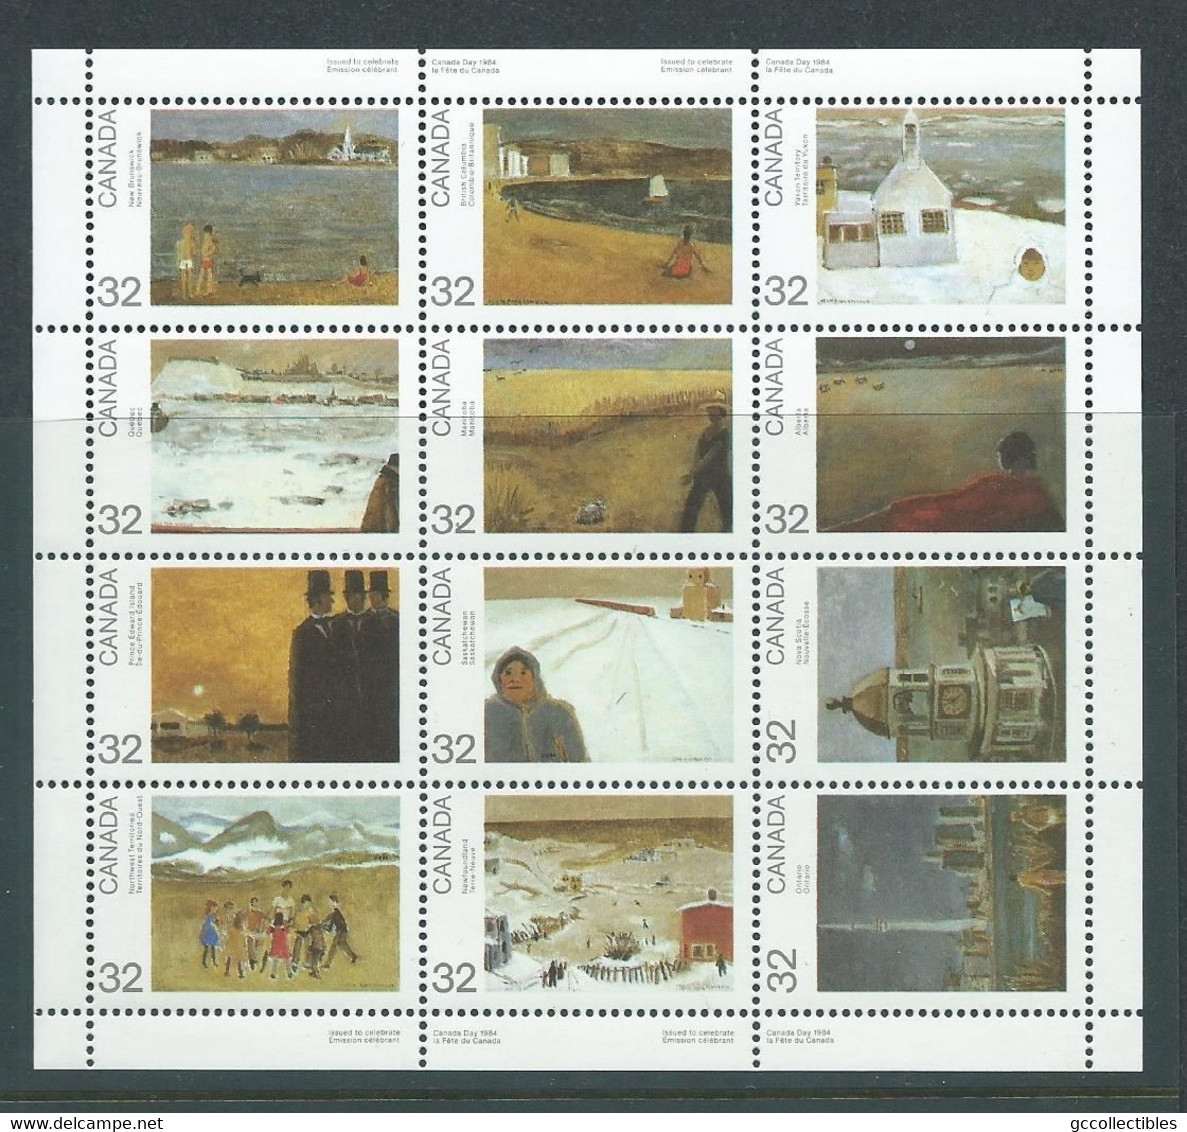 Canada # 1027a (1016-1027) Full Pane Of 12 MNH - Canada Day 1984 (2) - Full Sheets & Multiples